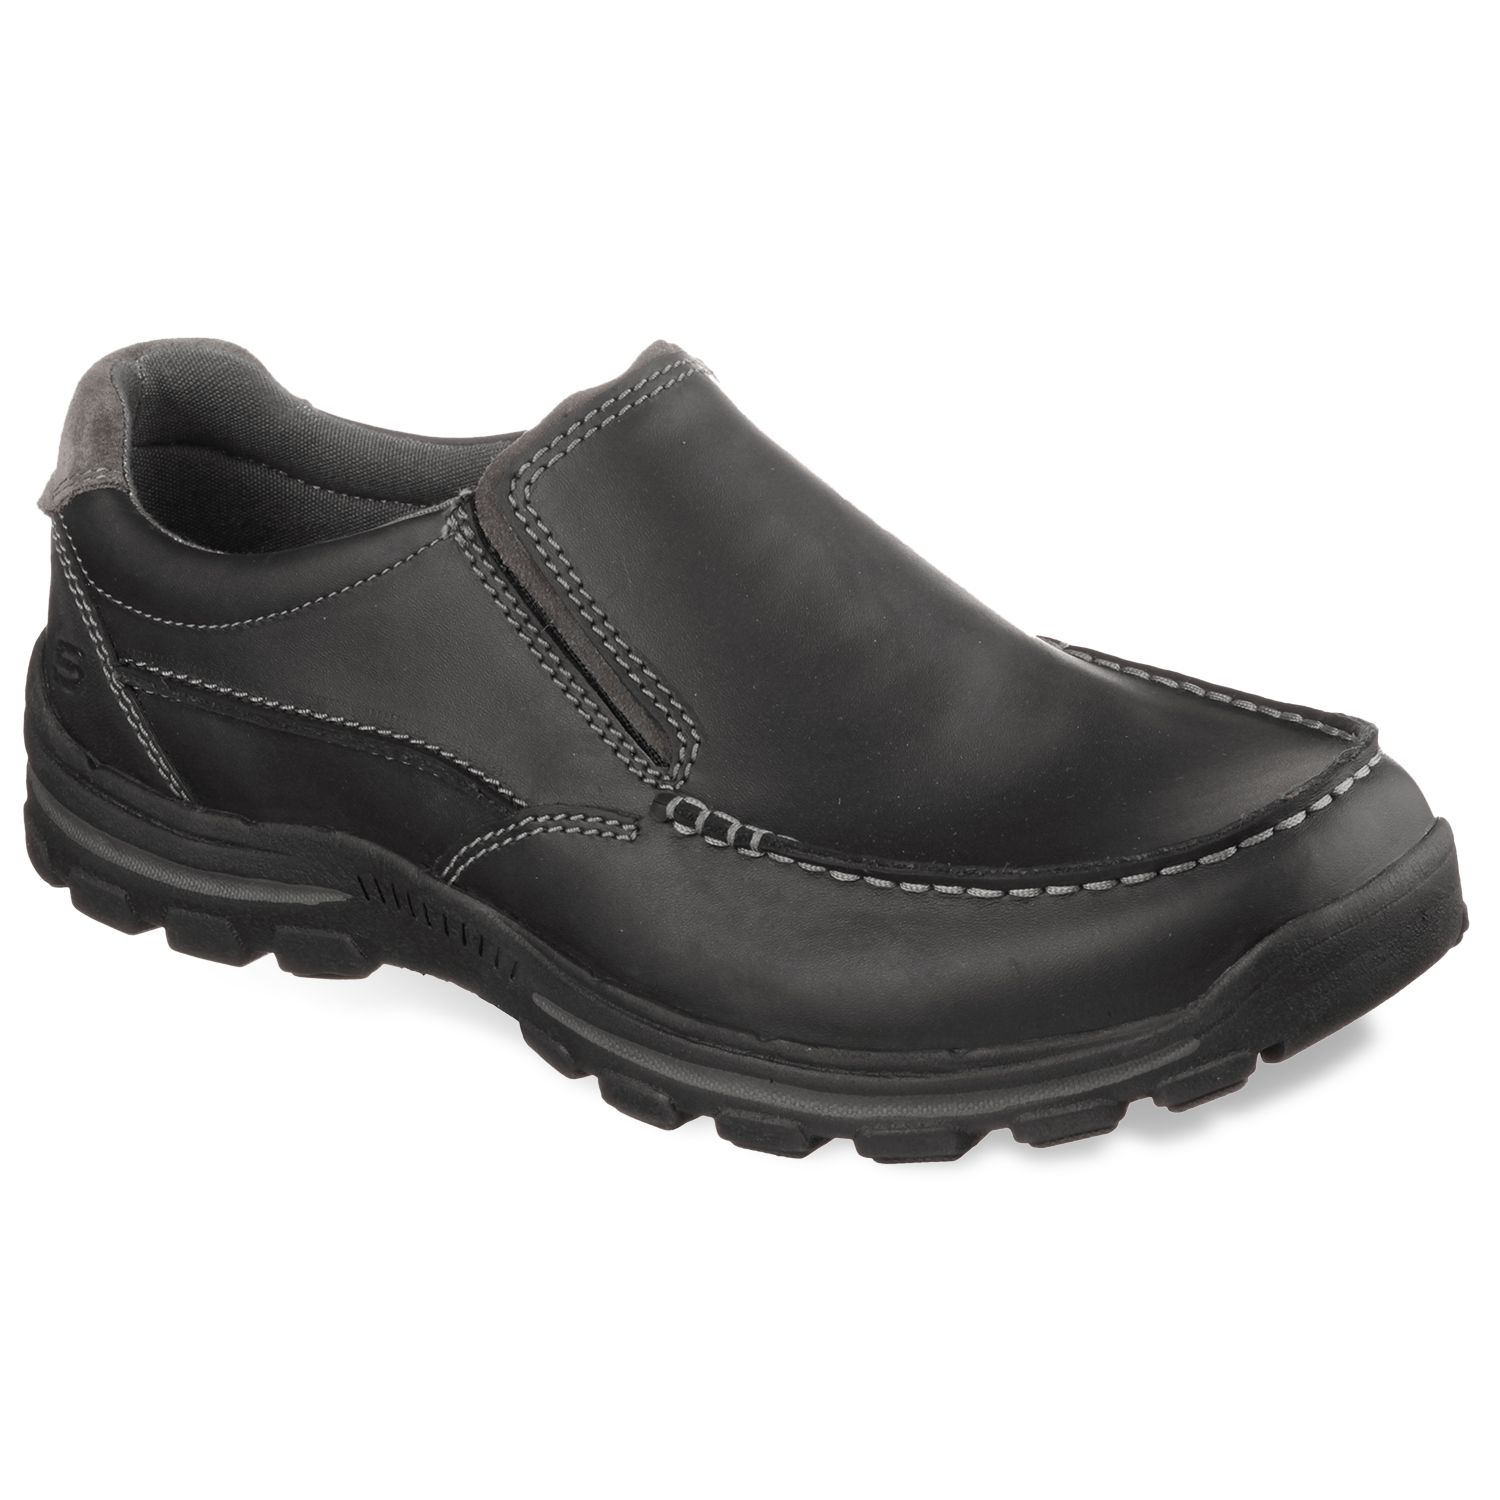 Relaxed Fit Rayland Men's Slip-On Shoes